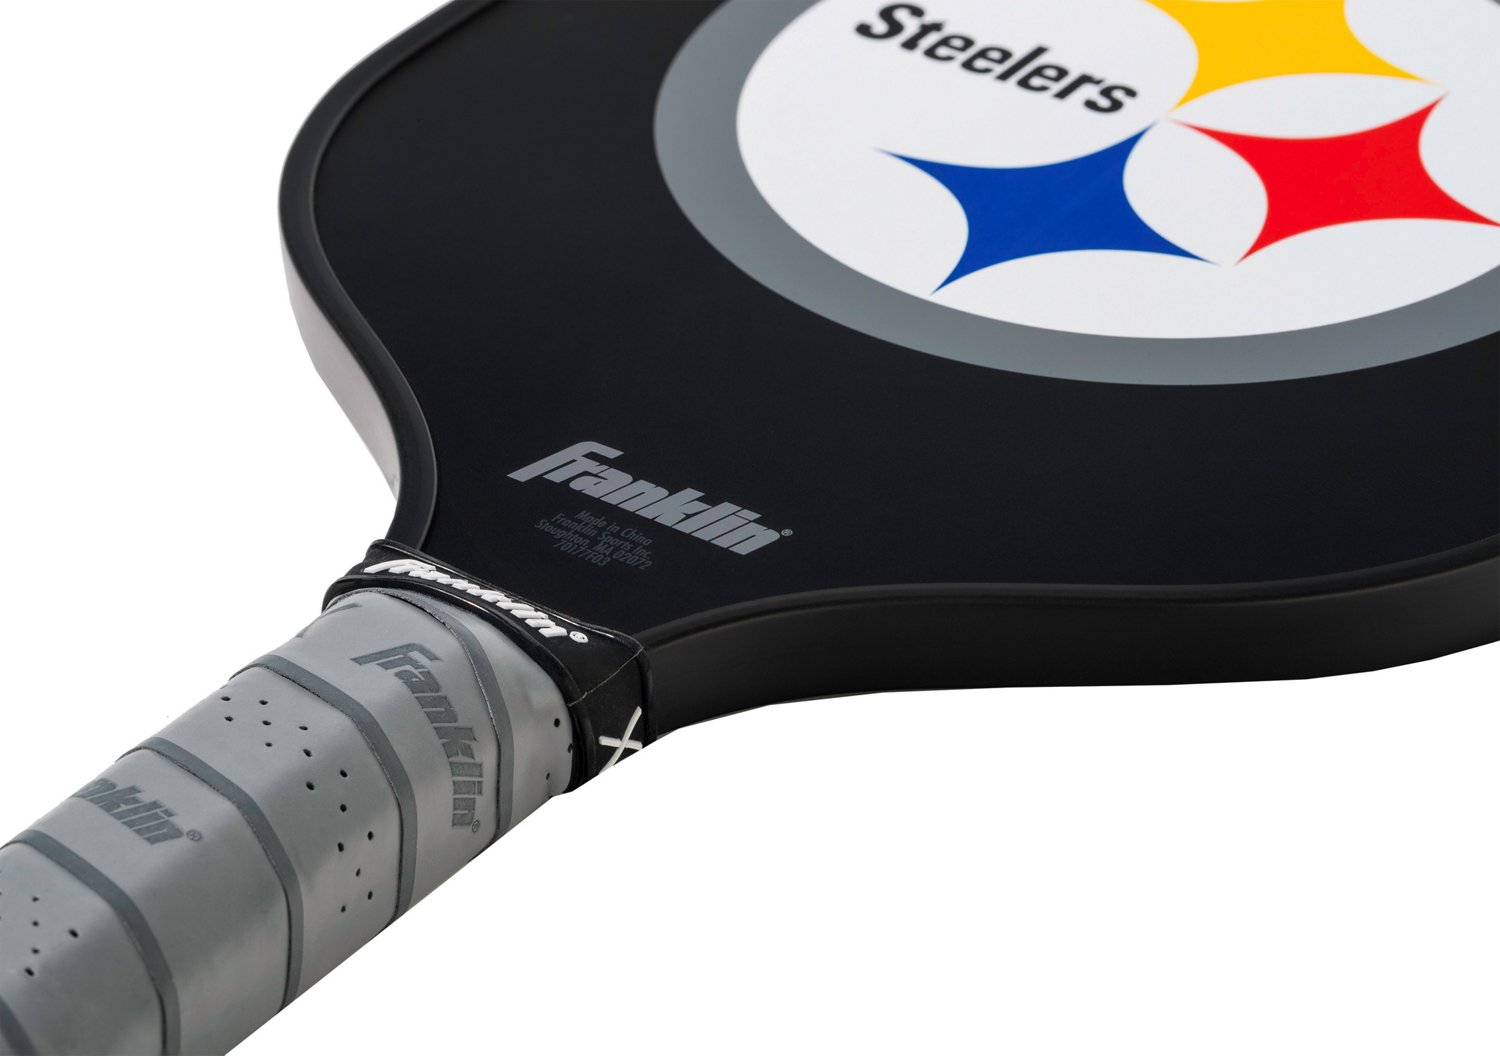 Franklin Pittsburgh Steelers Pickleball Paddle